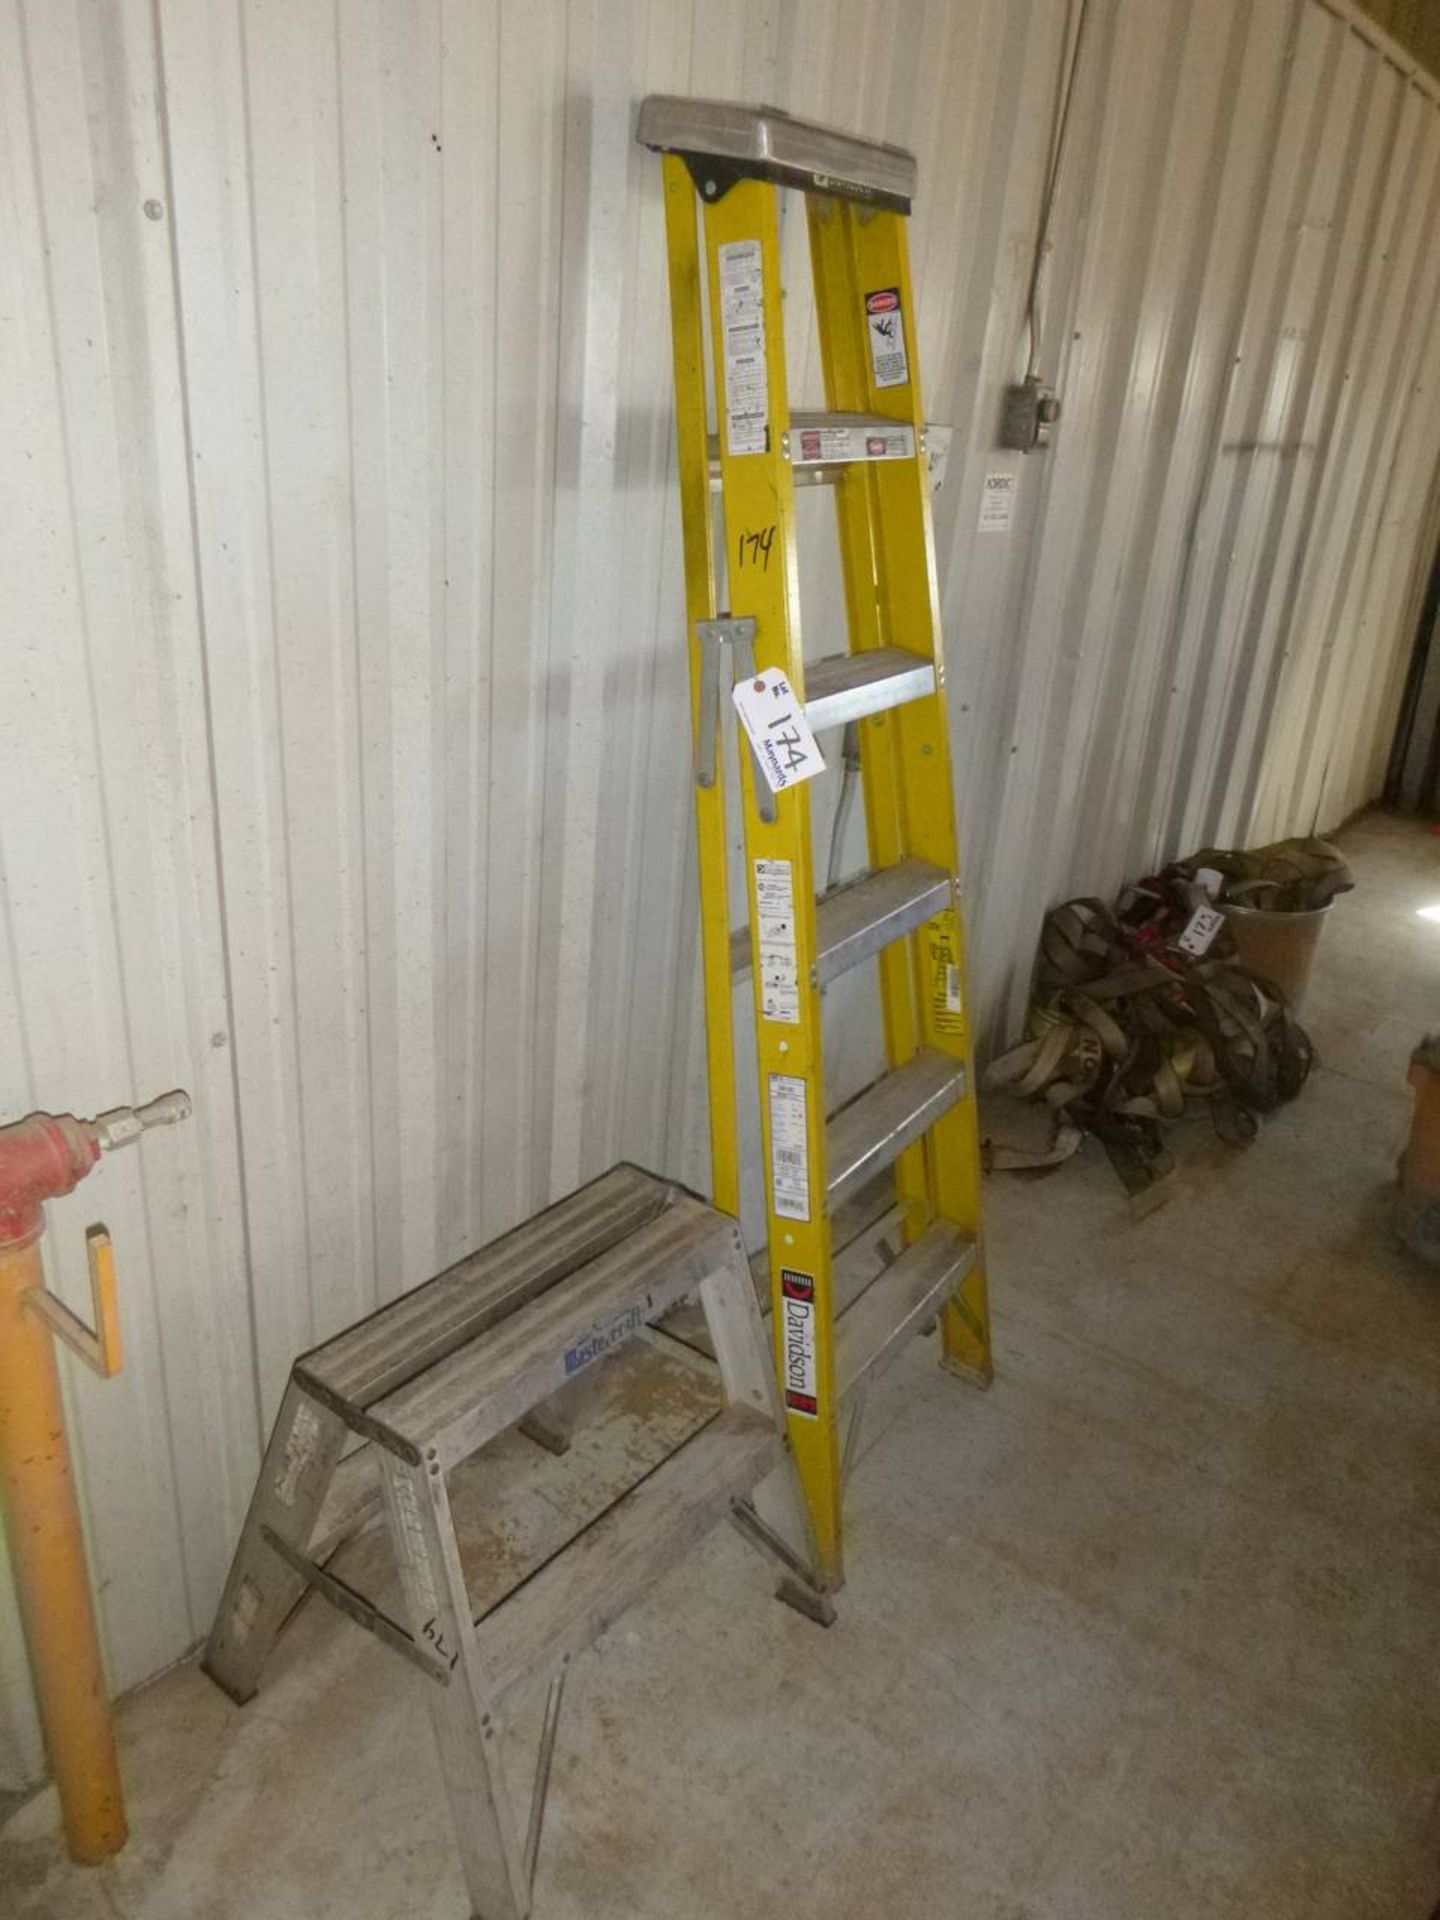 6' step ladder and 2' step